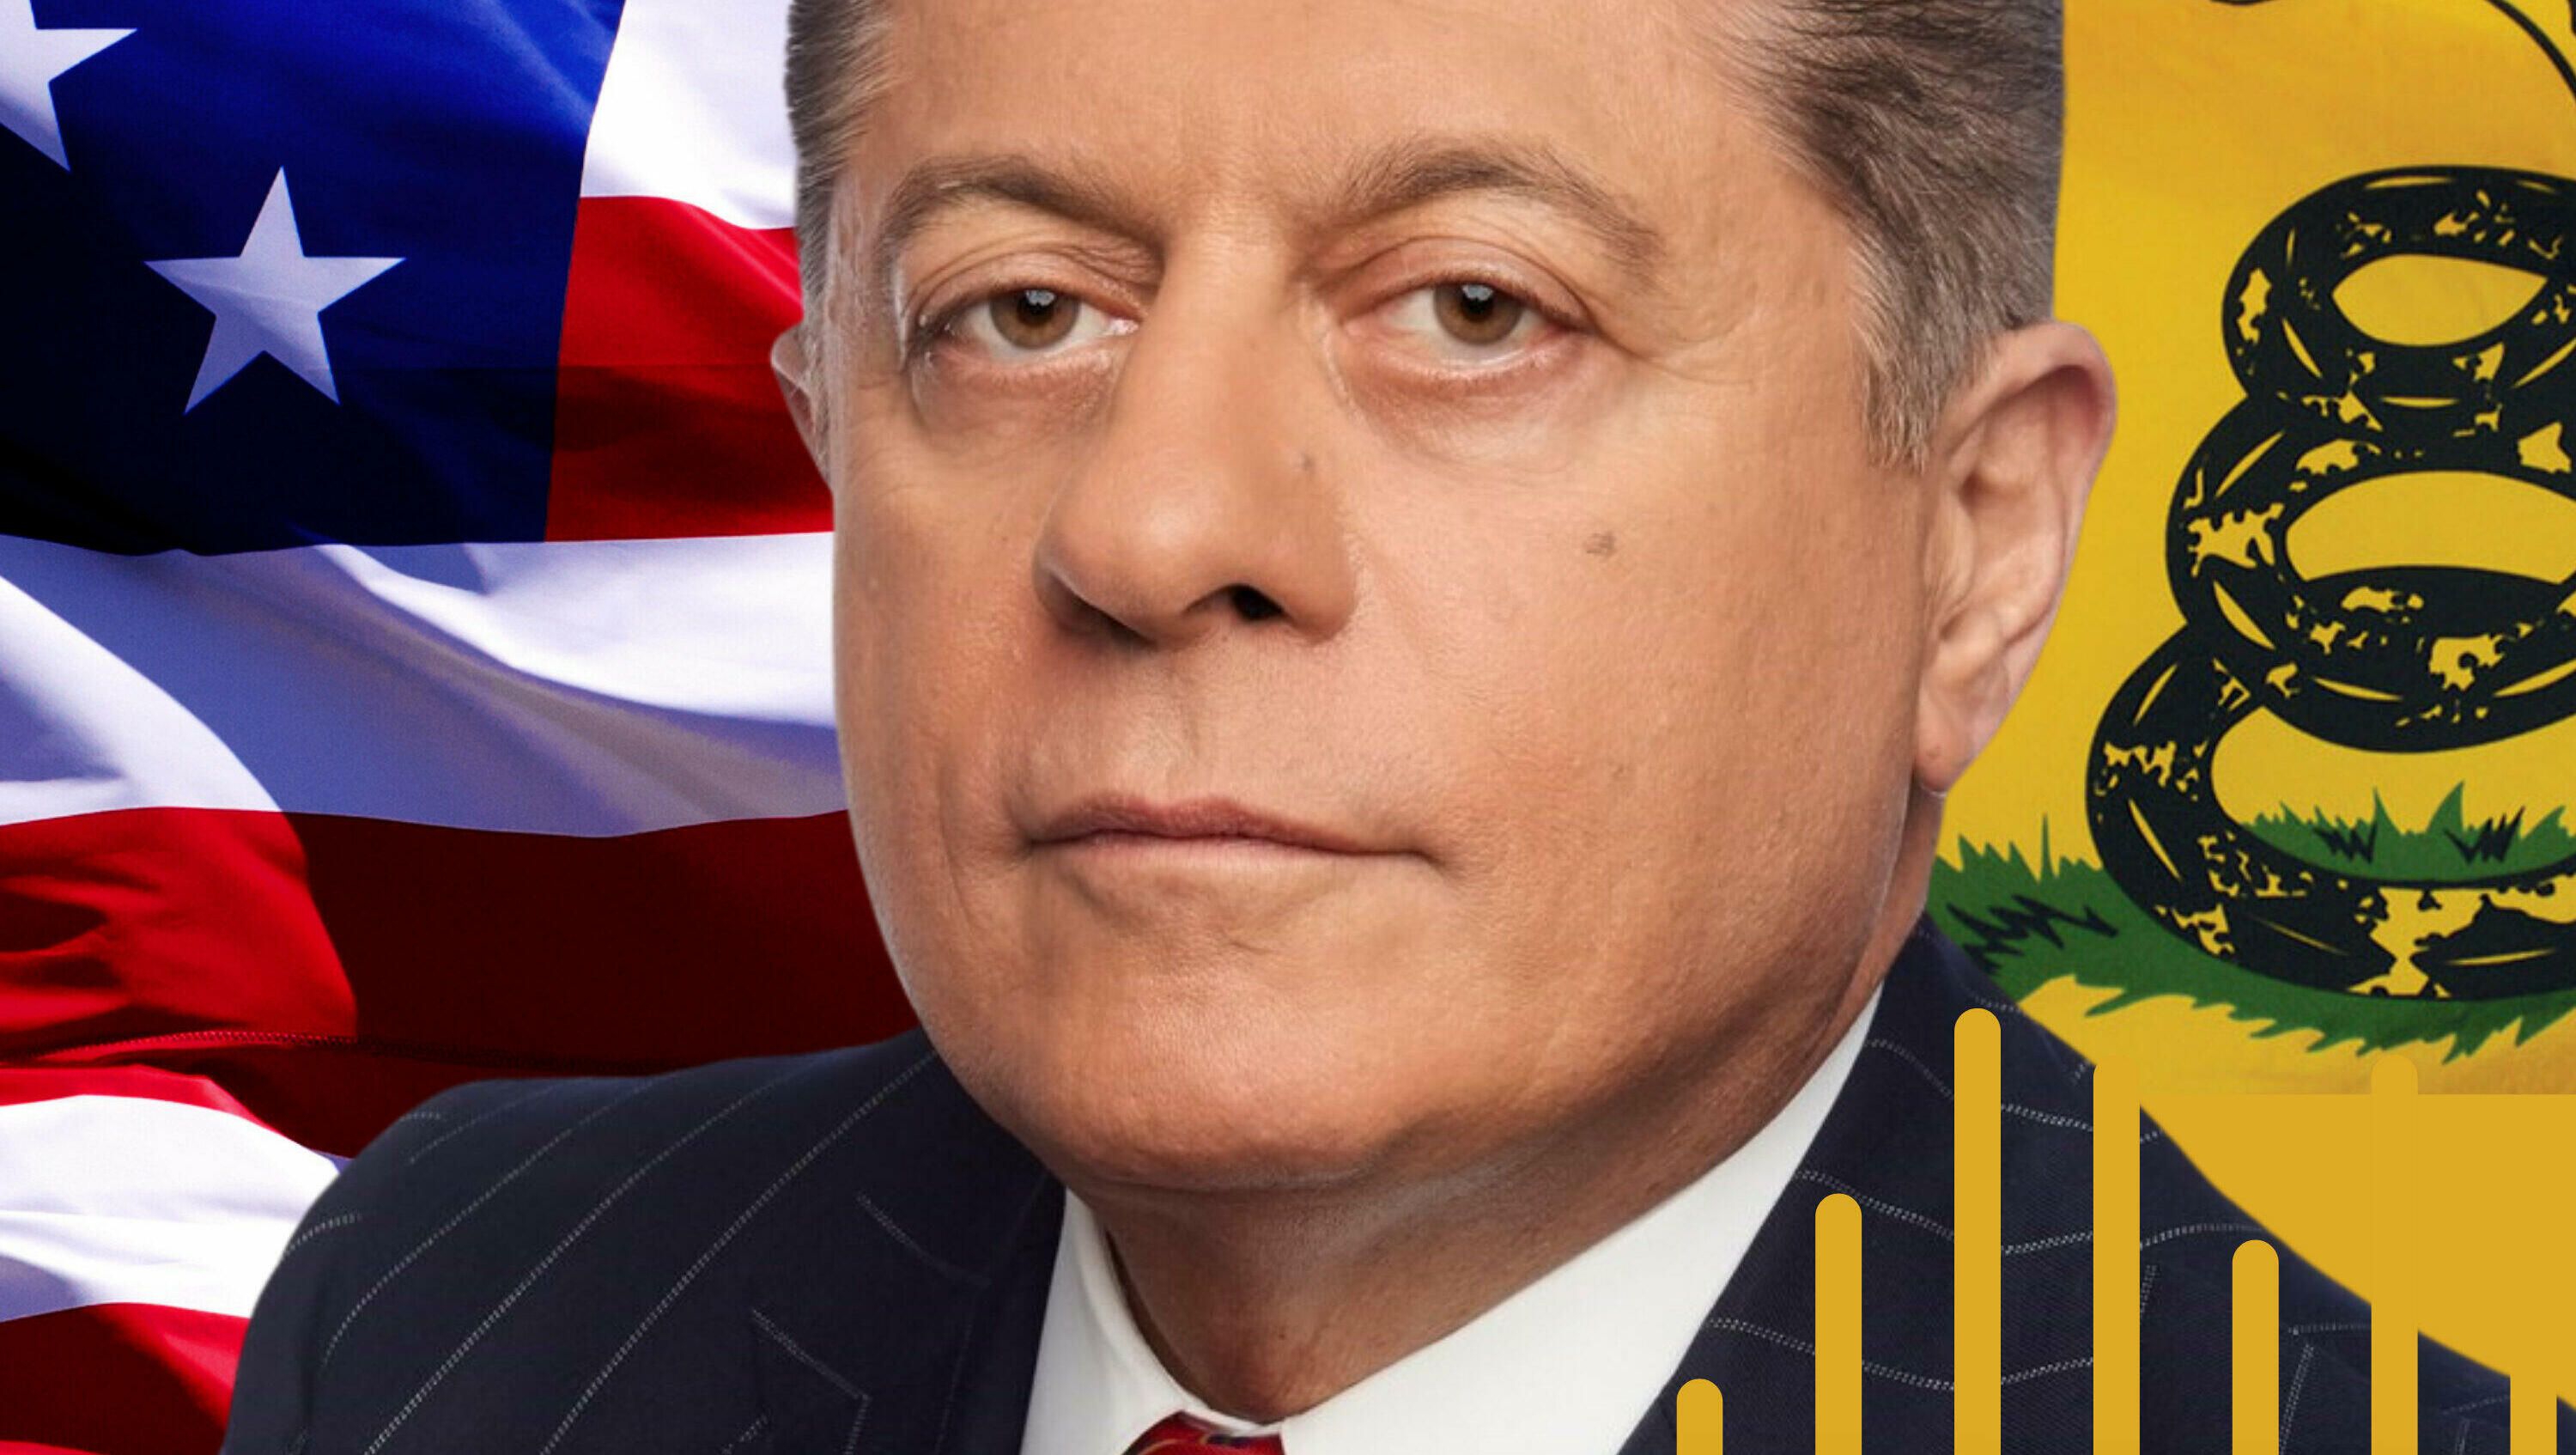 Judge Napolitano - War and Indifference